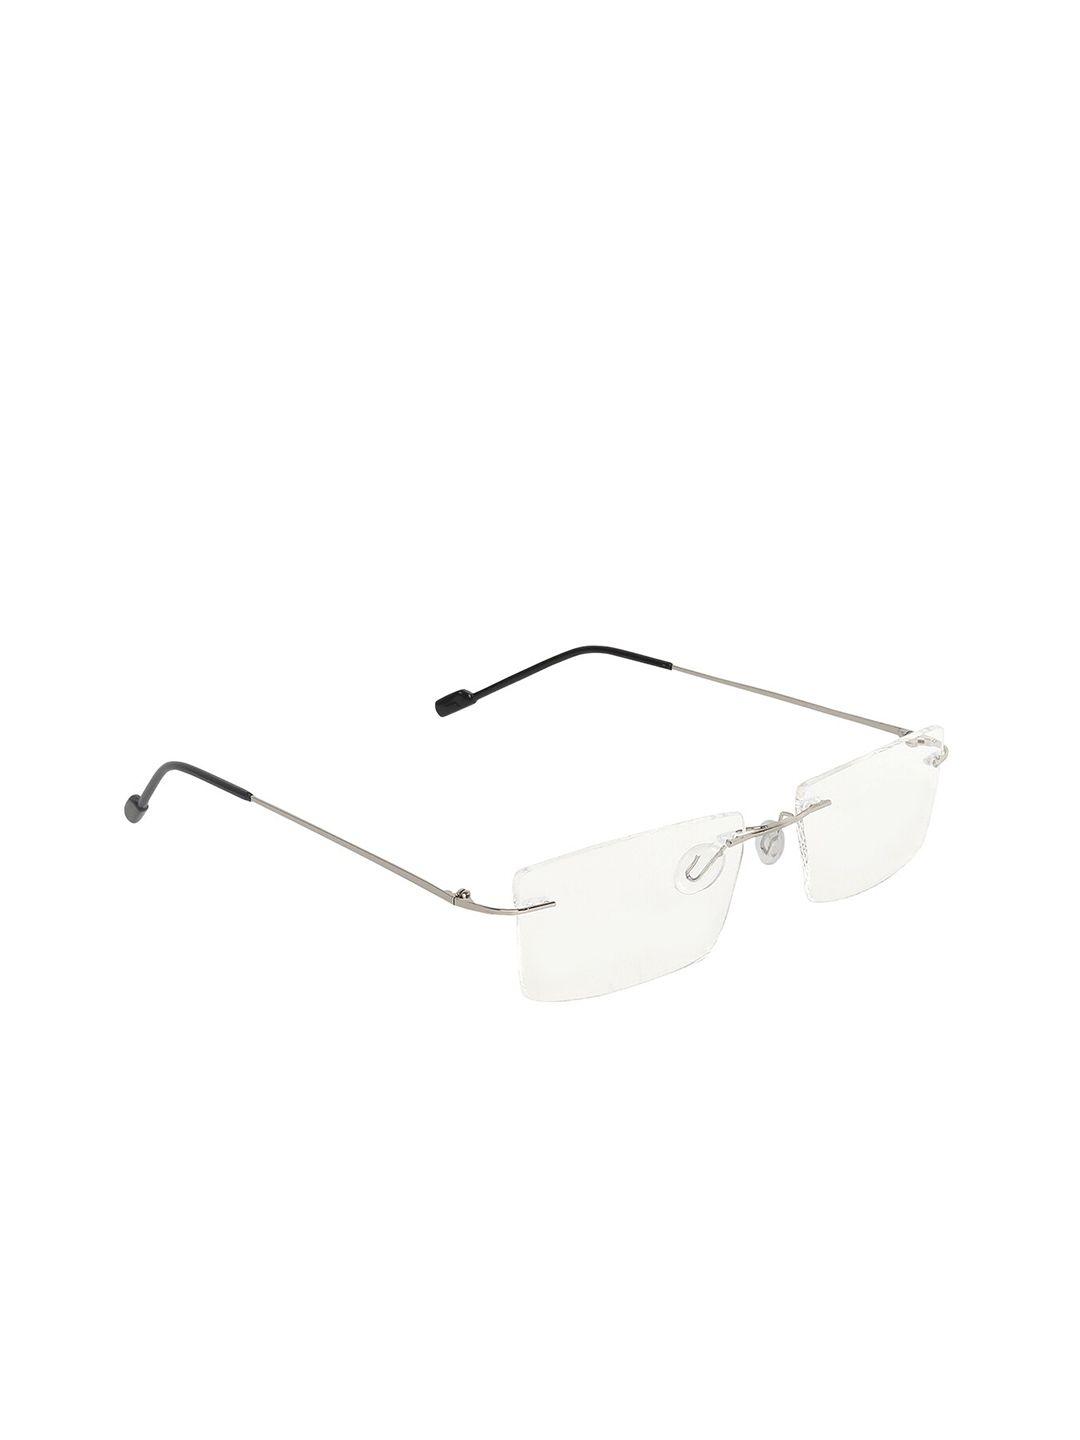 garth rectangle sunglasses with uv protected lens